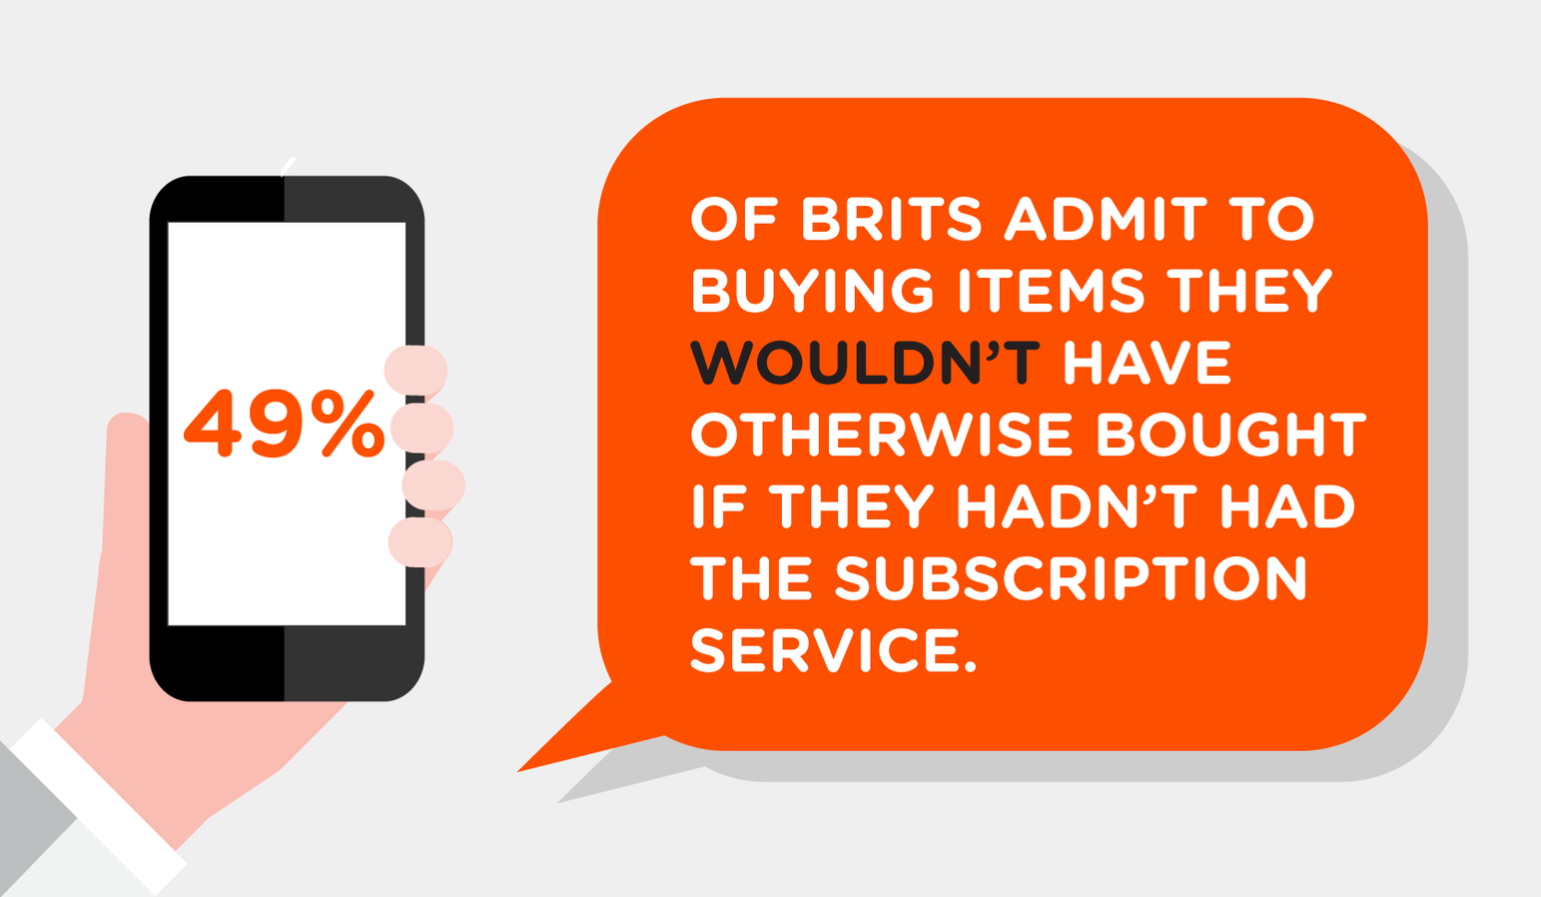 Whistl - 49% of Brits admit to buying items they wouldn't have if they didn't have the subscription service